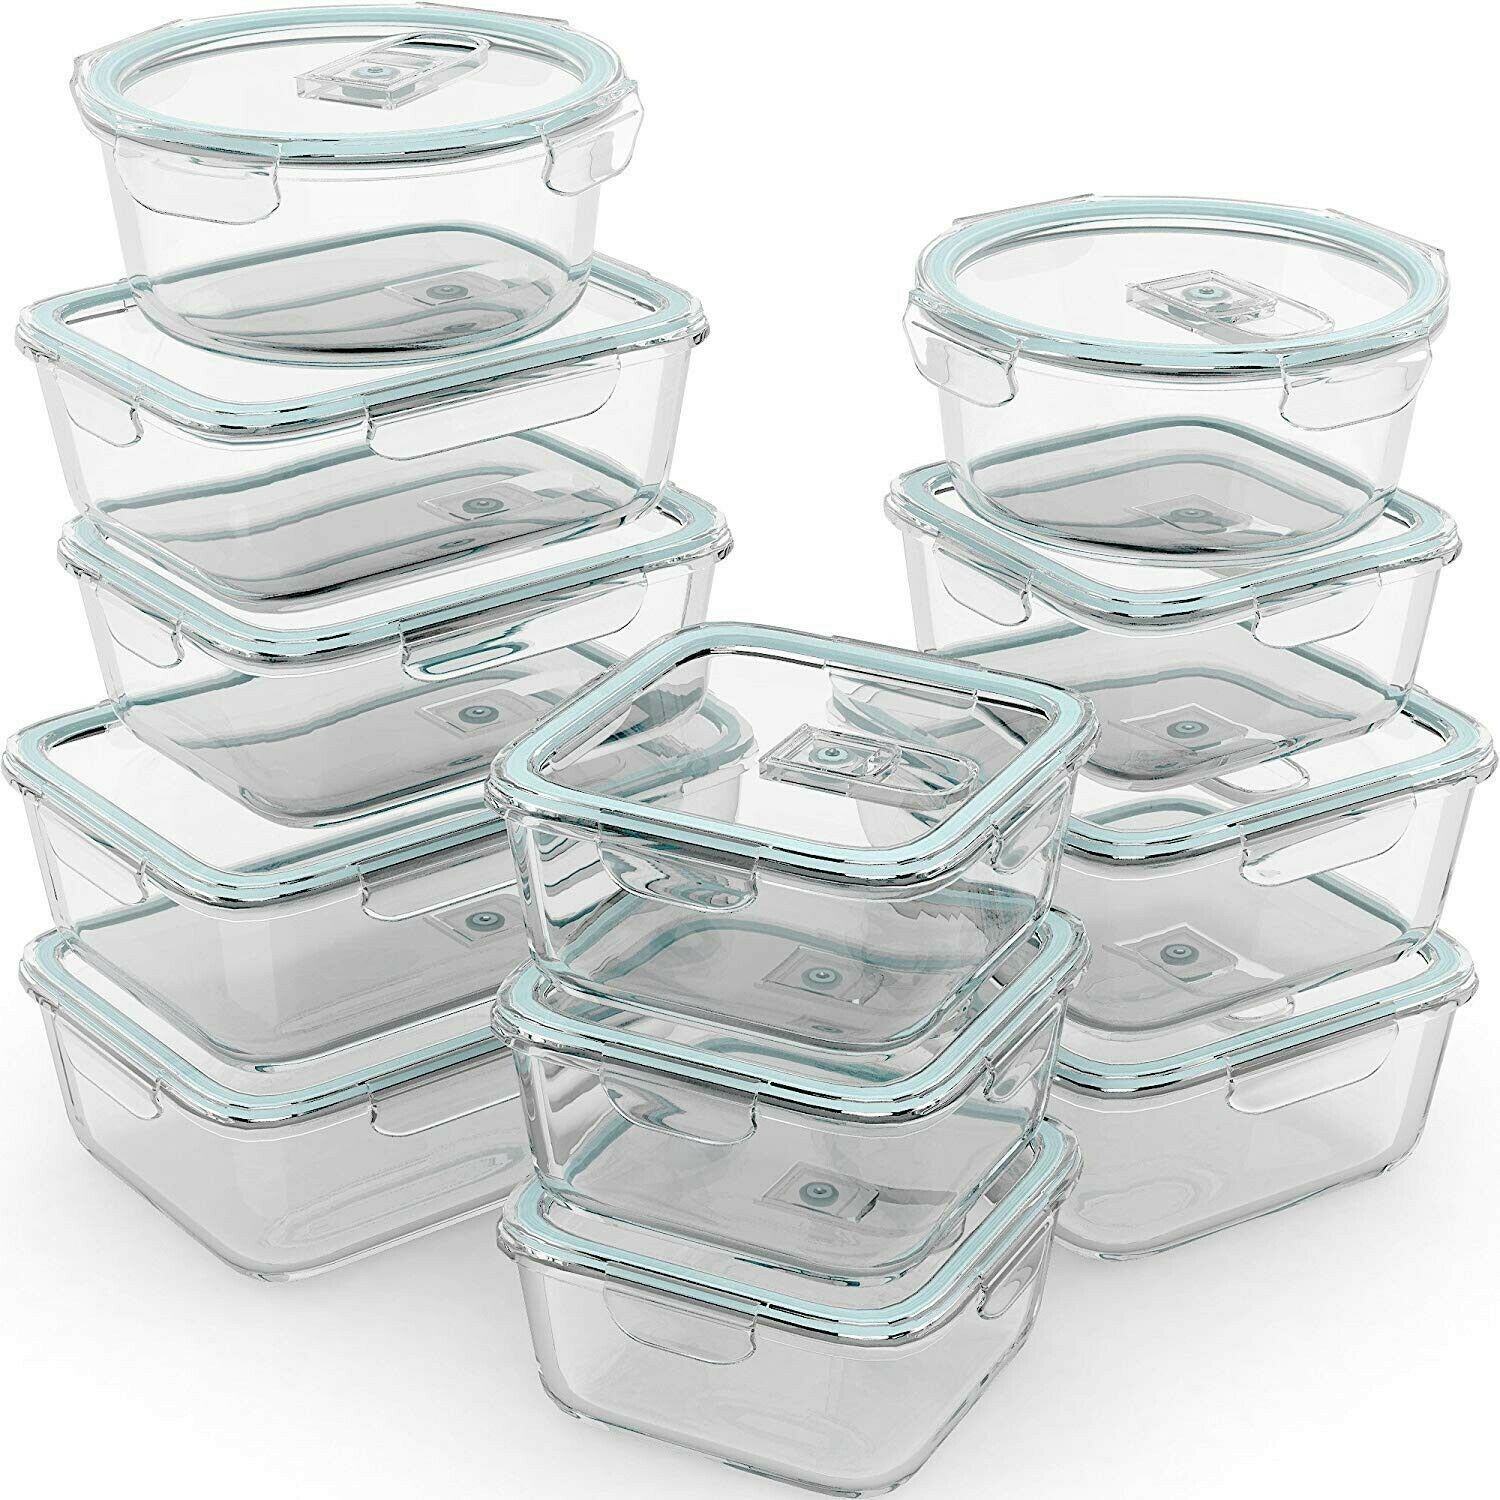 Razab 24 Piece Glass Food Storage Containers w/Airtight Lids - Microwave/Oven...